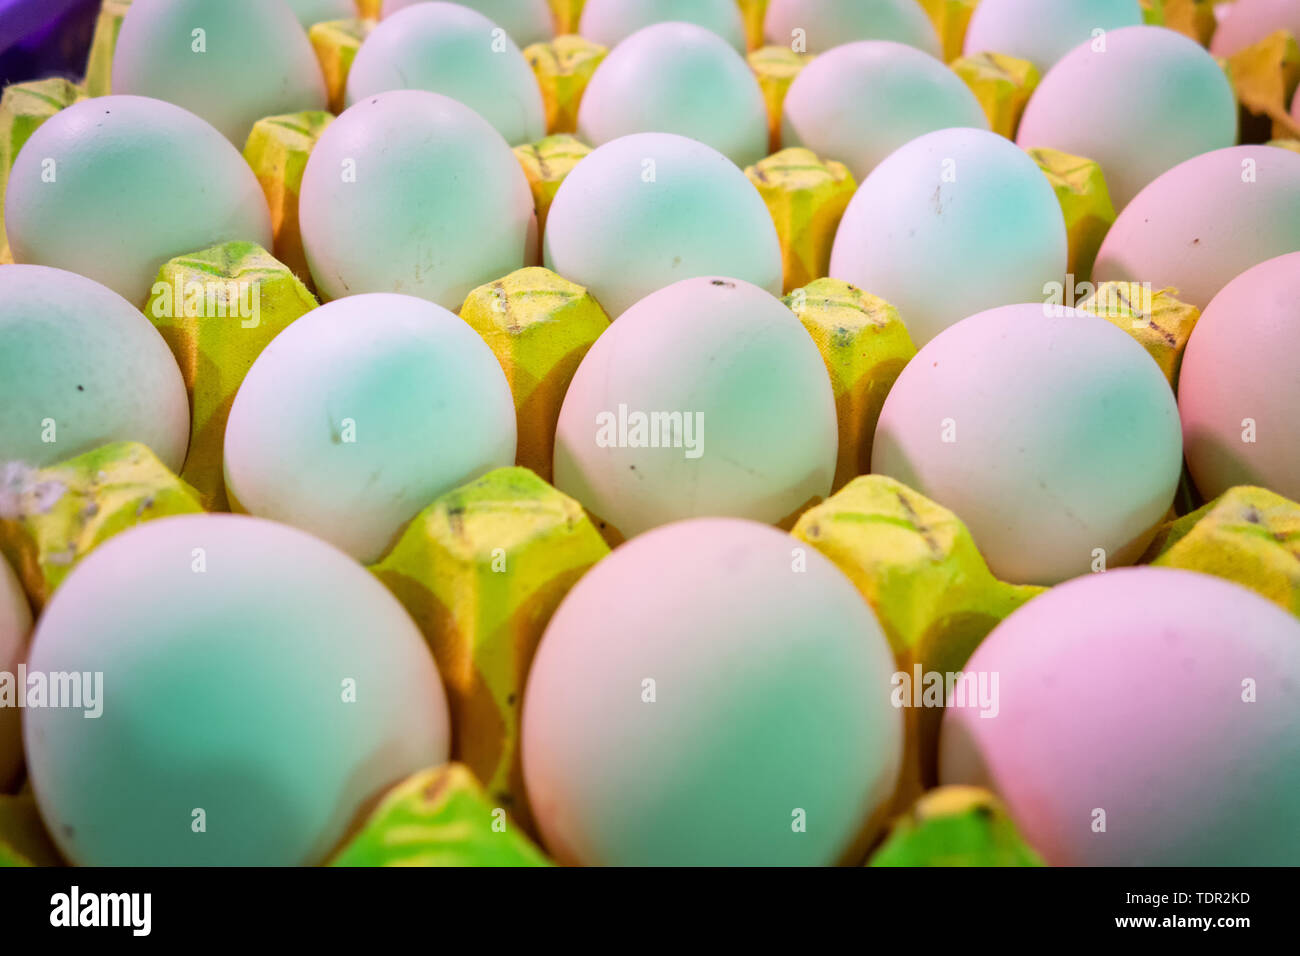 Eggs waiting for sale in the supermarket Stock Photo